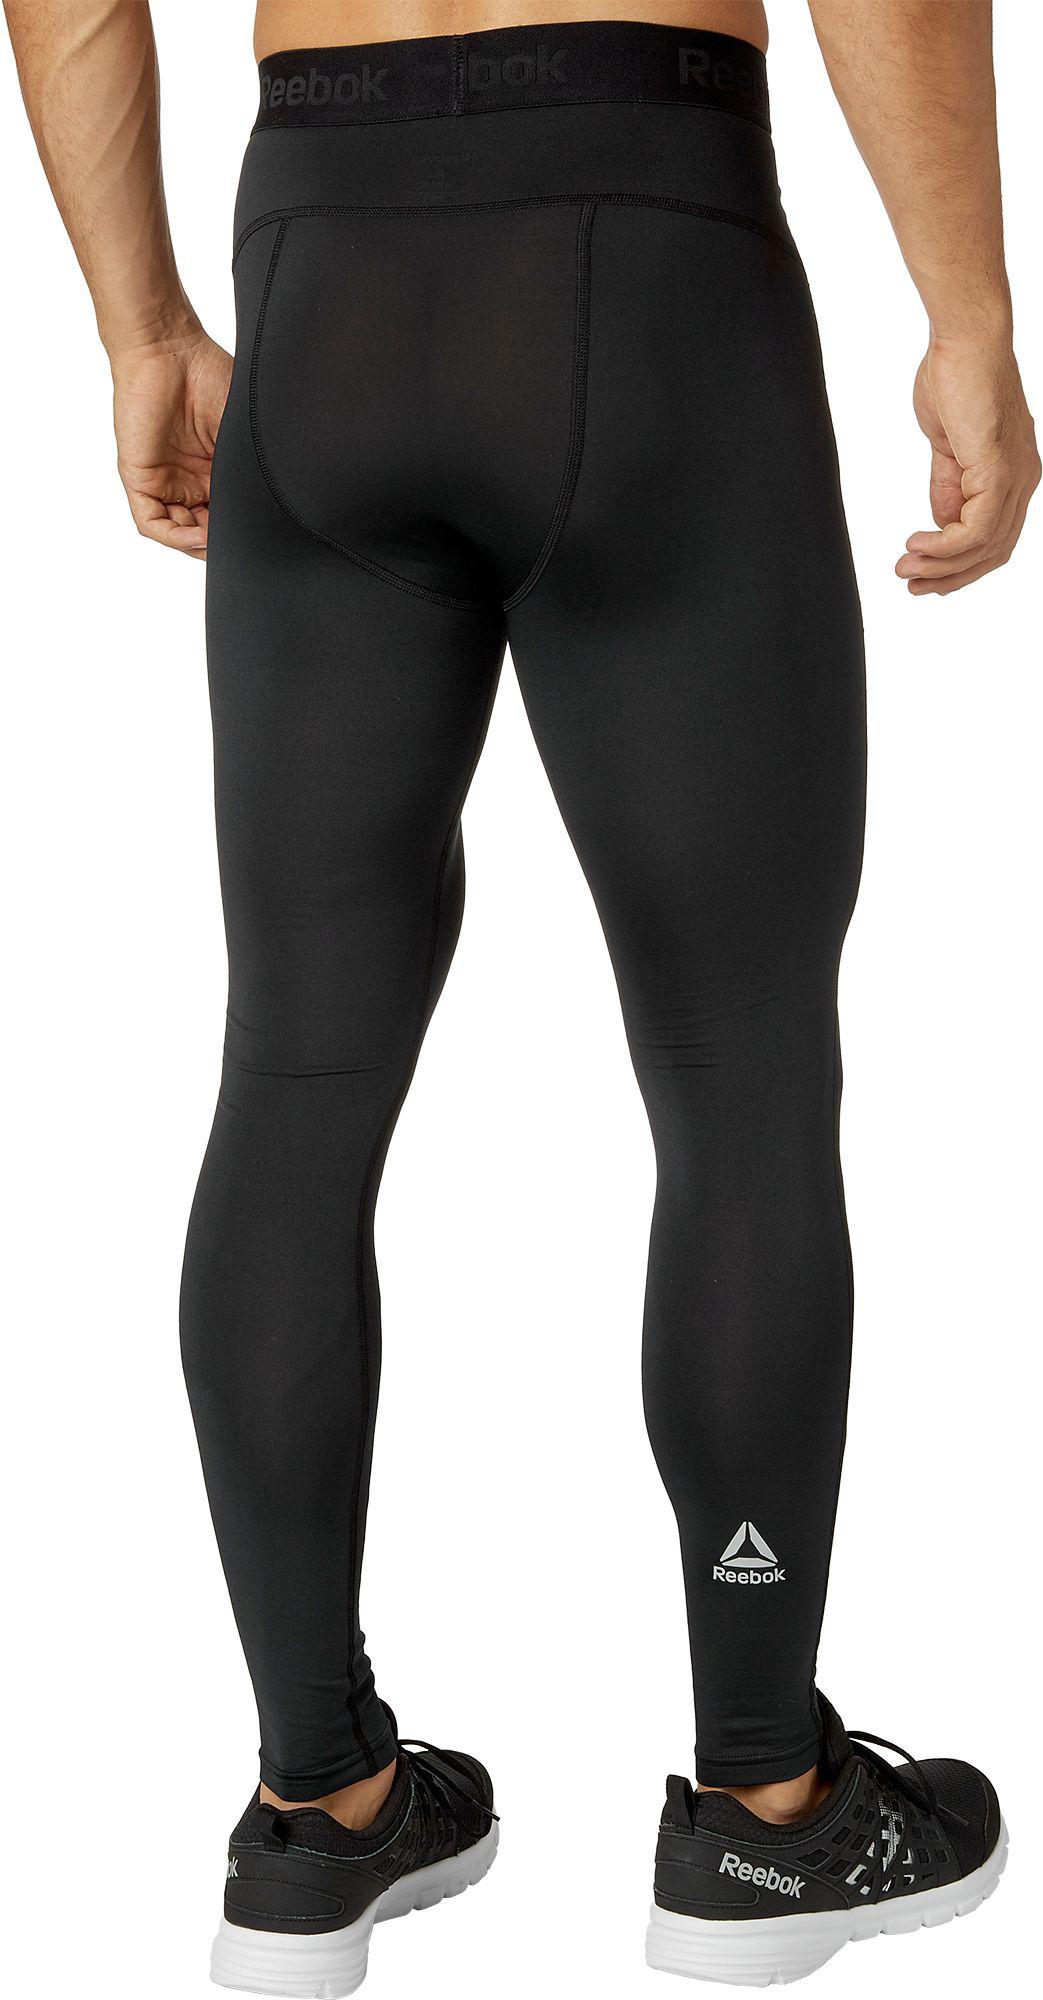 Reebok Synthetic Cold Weather Compression Pants in Black for Men - Lyst